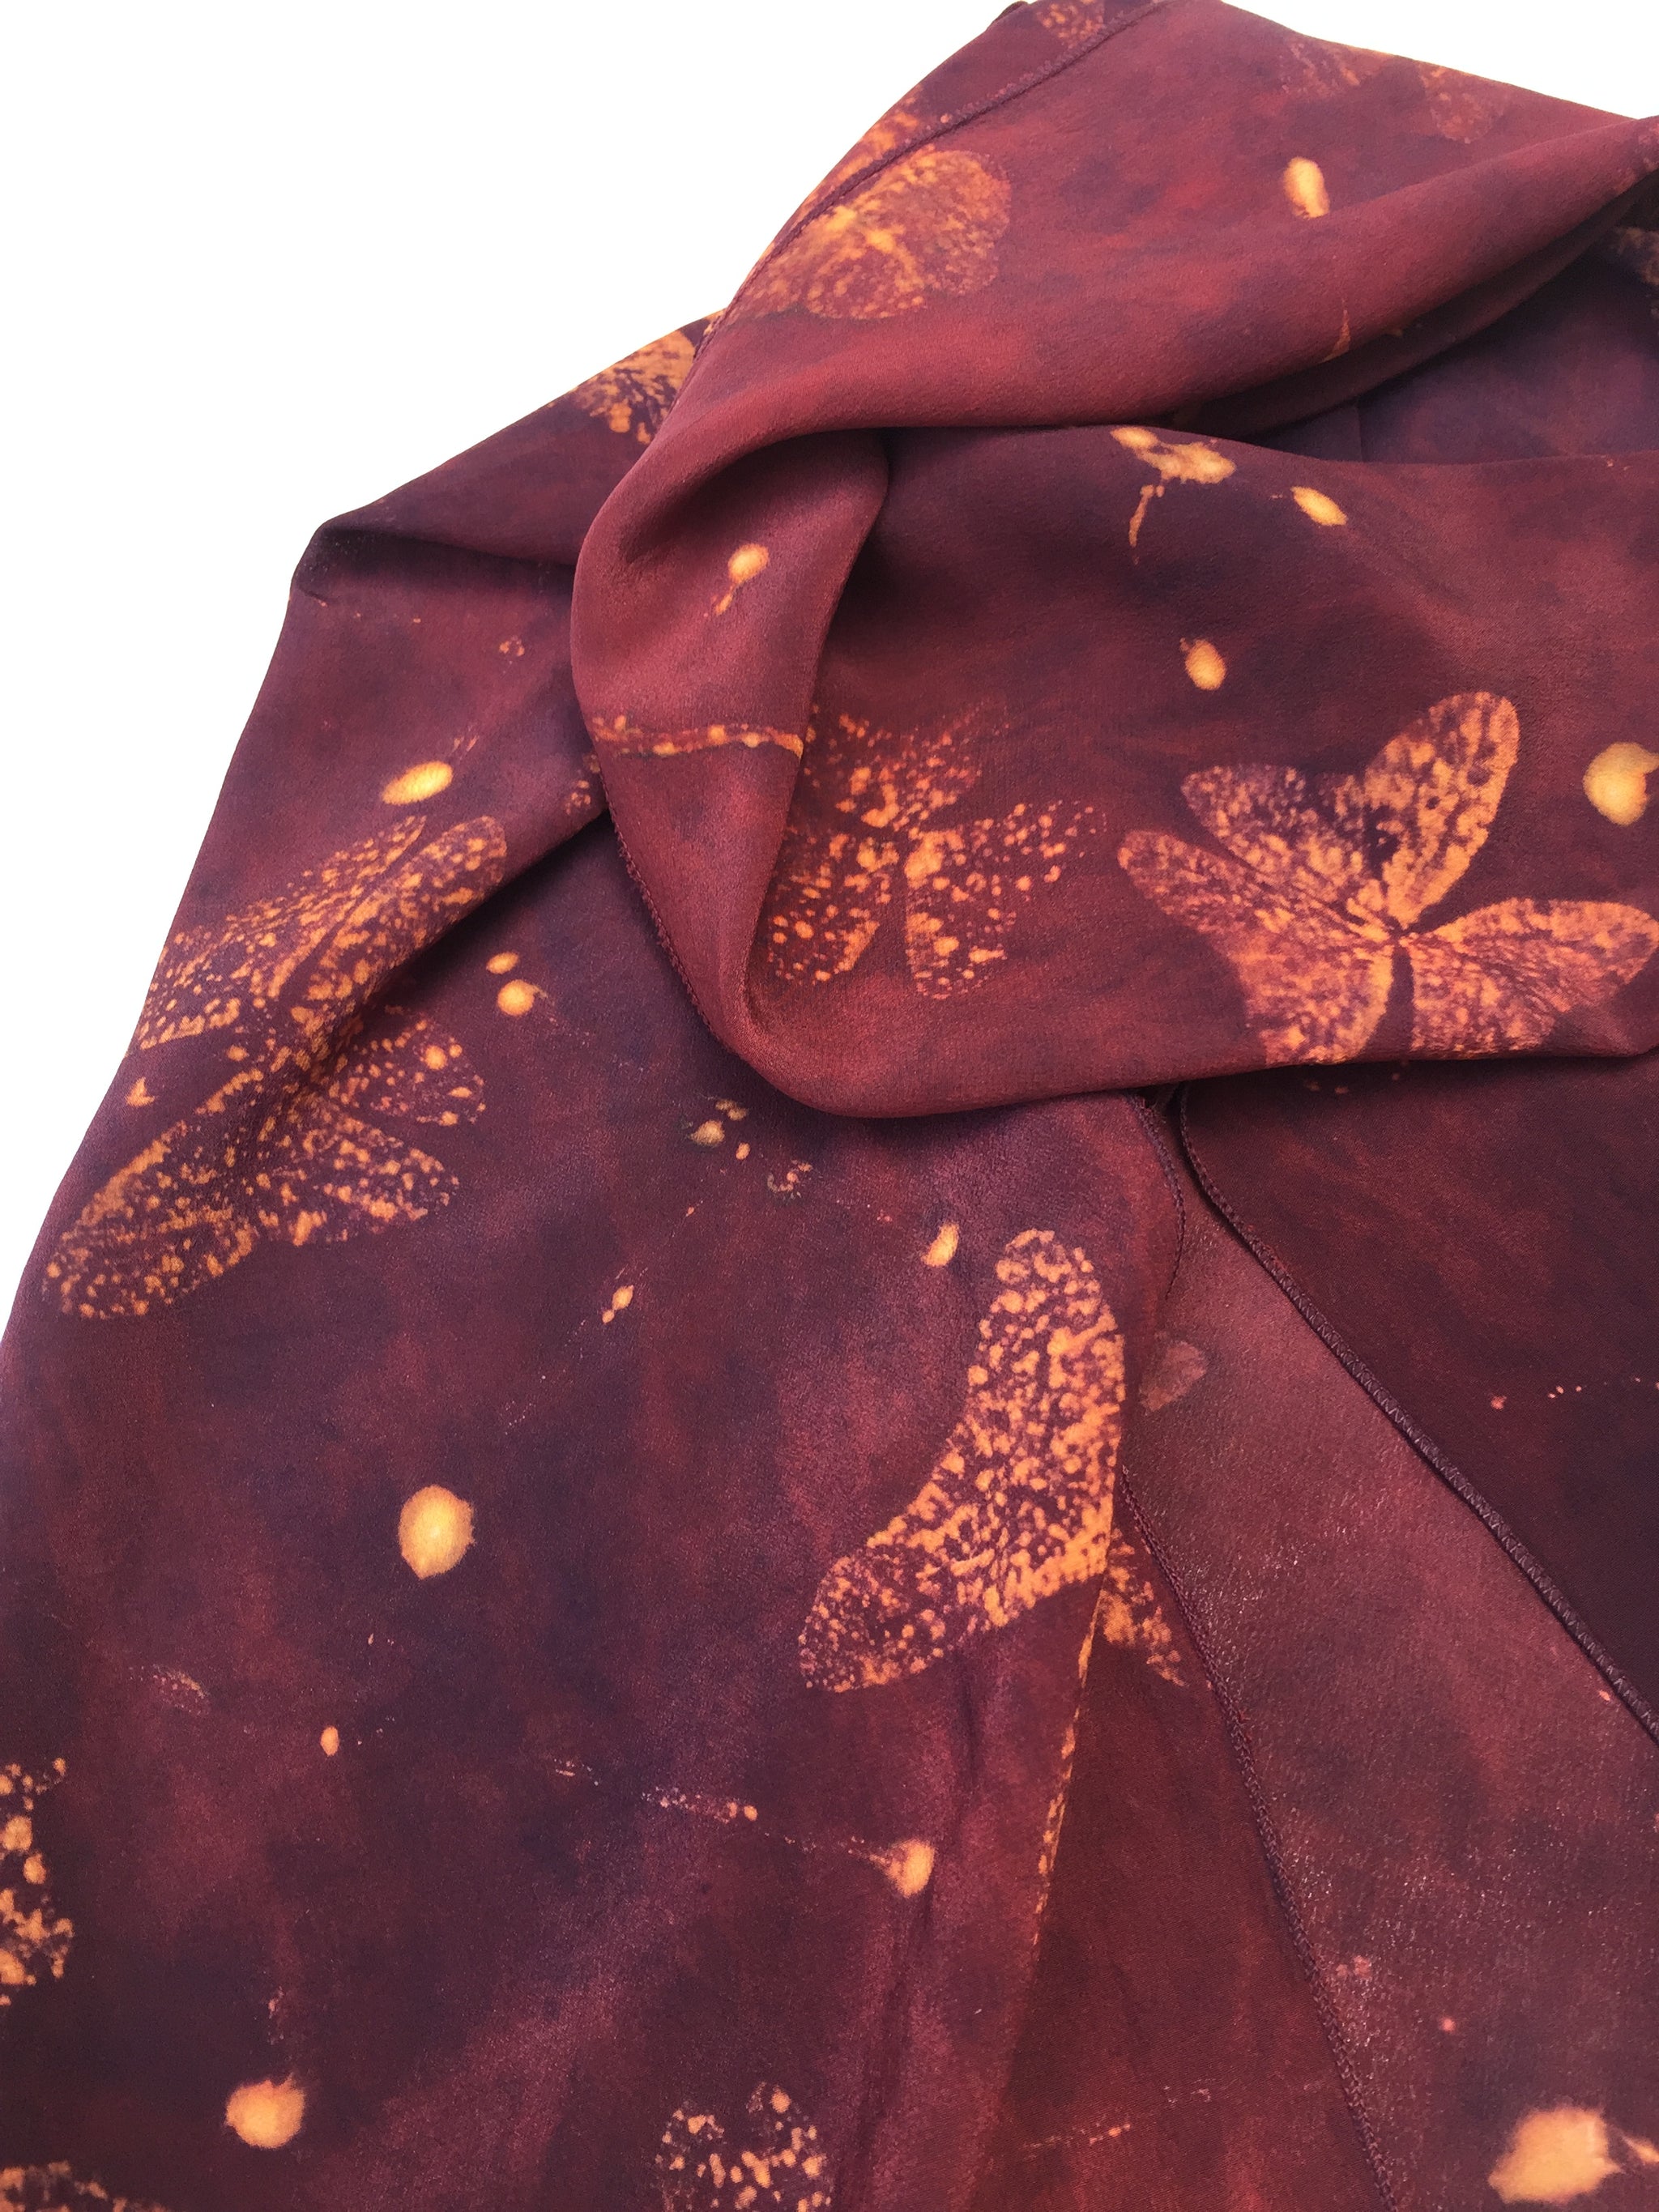 Naturally Dyed and printed scarf by Pam de Groot